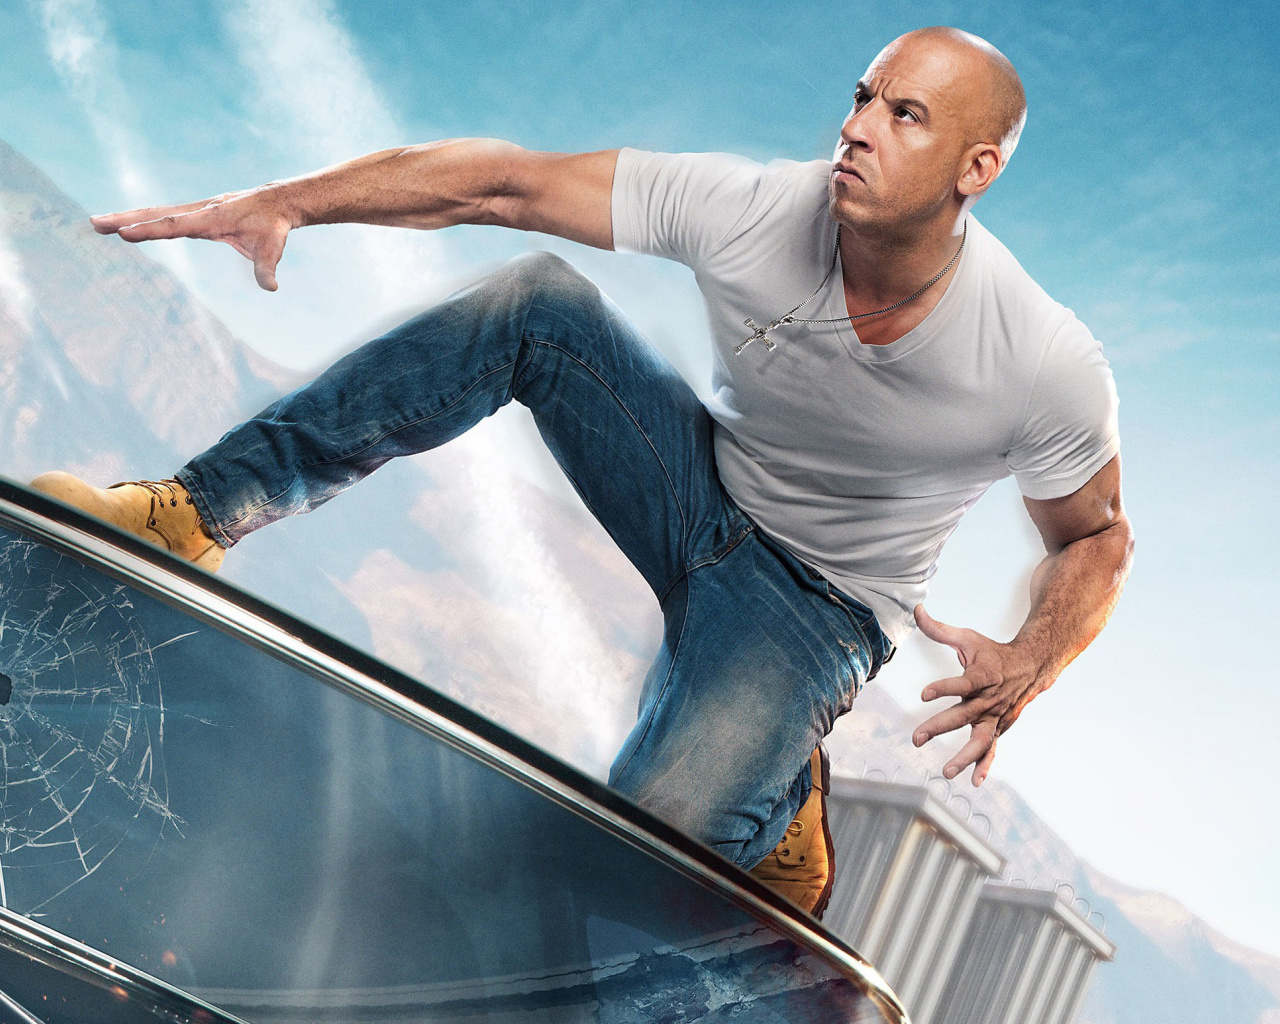 Fast & Furious Supercharged Poster with Vin Diesel screenshot #1 1280x1024